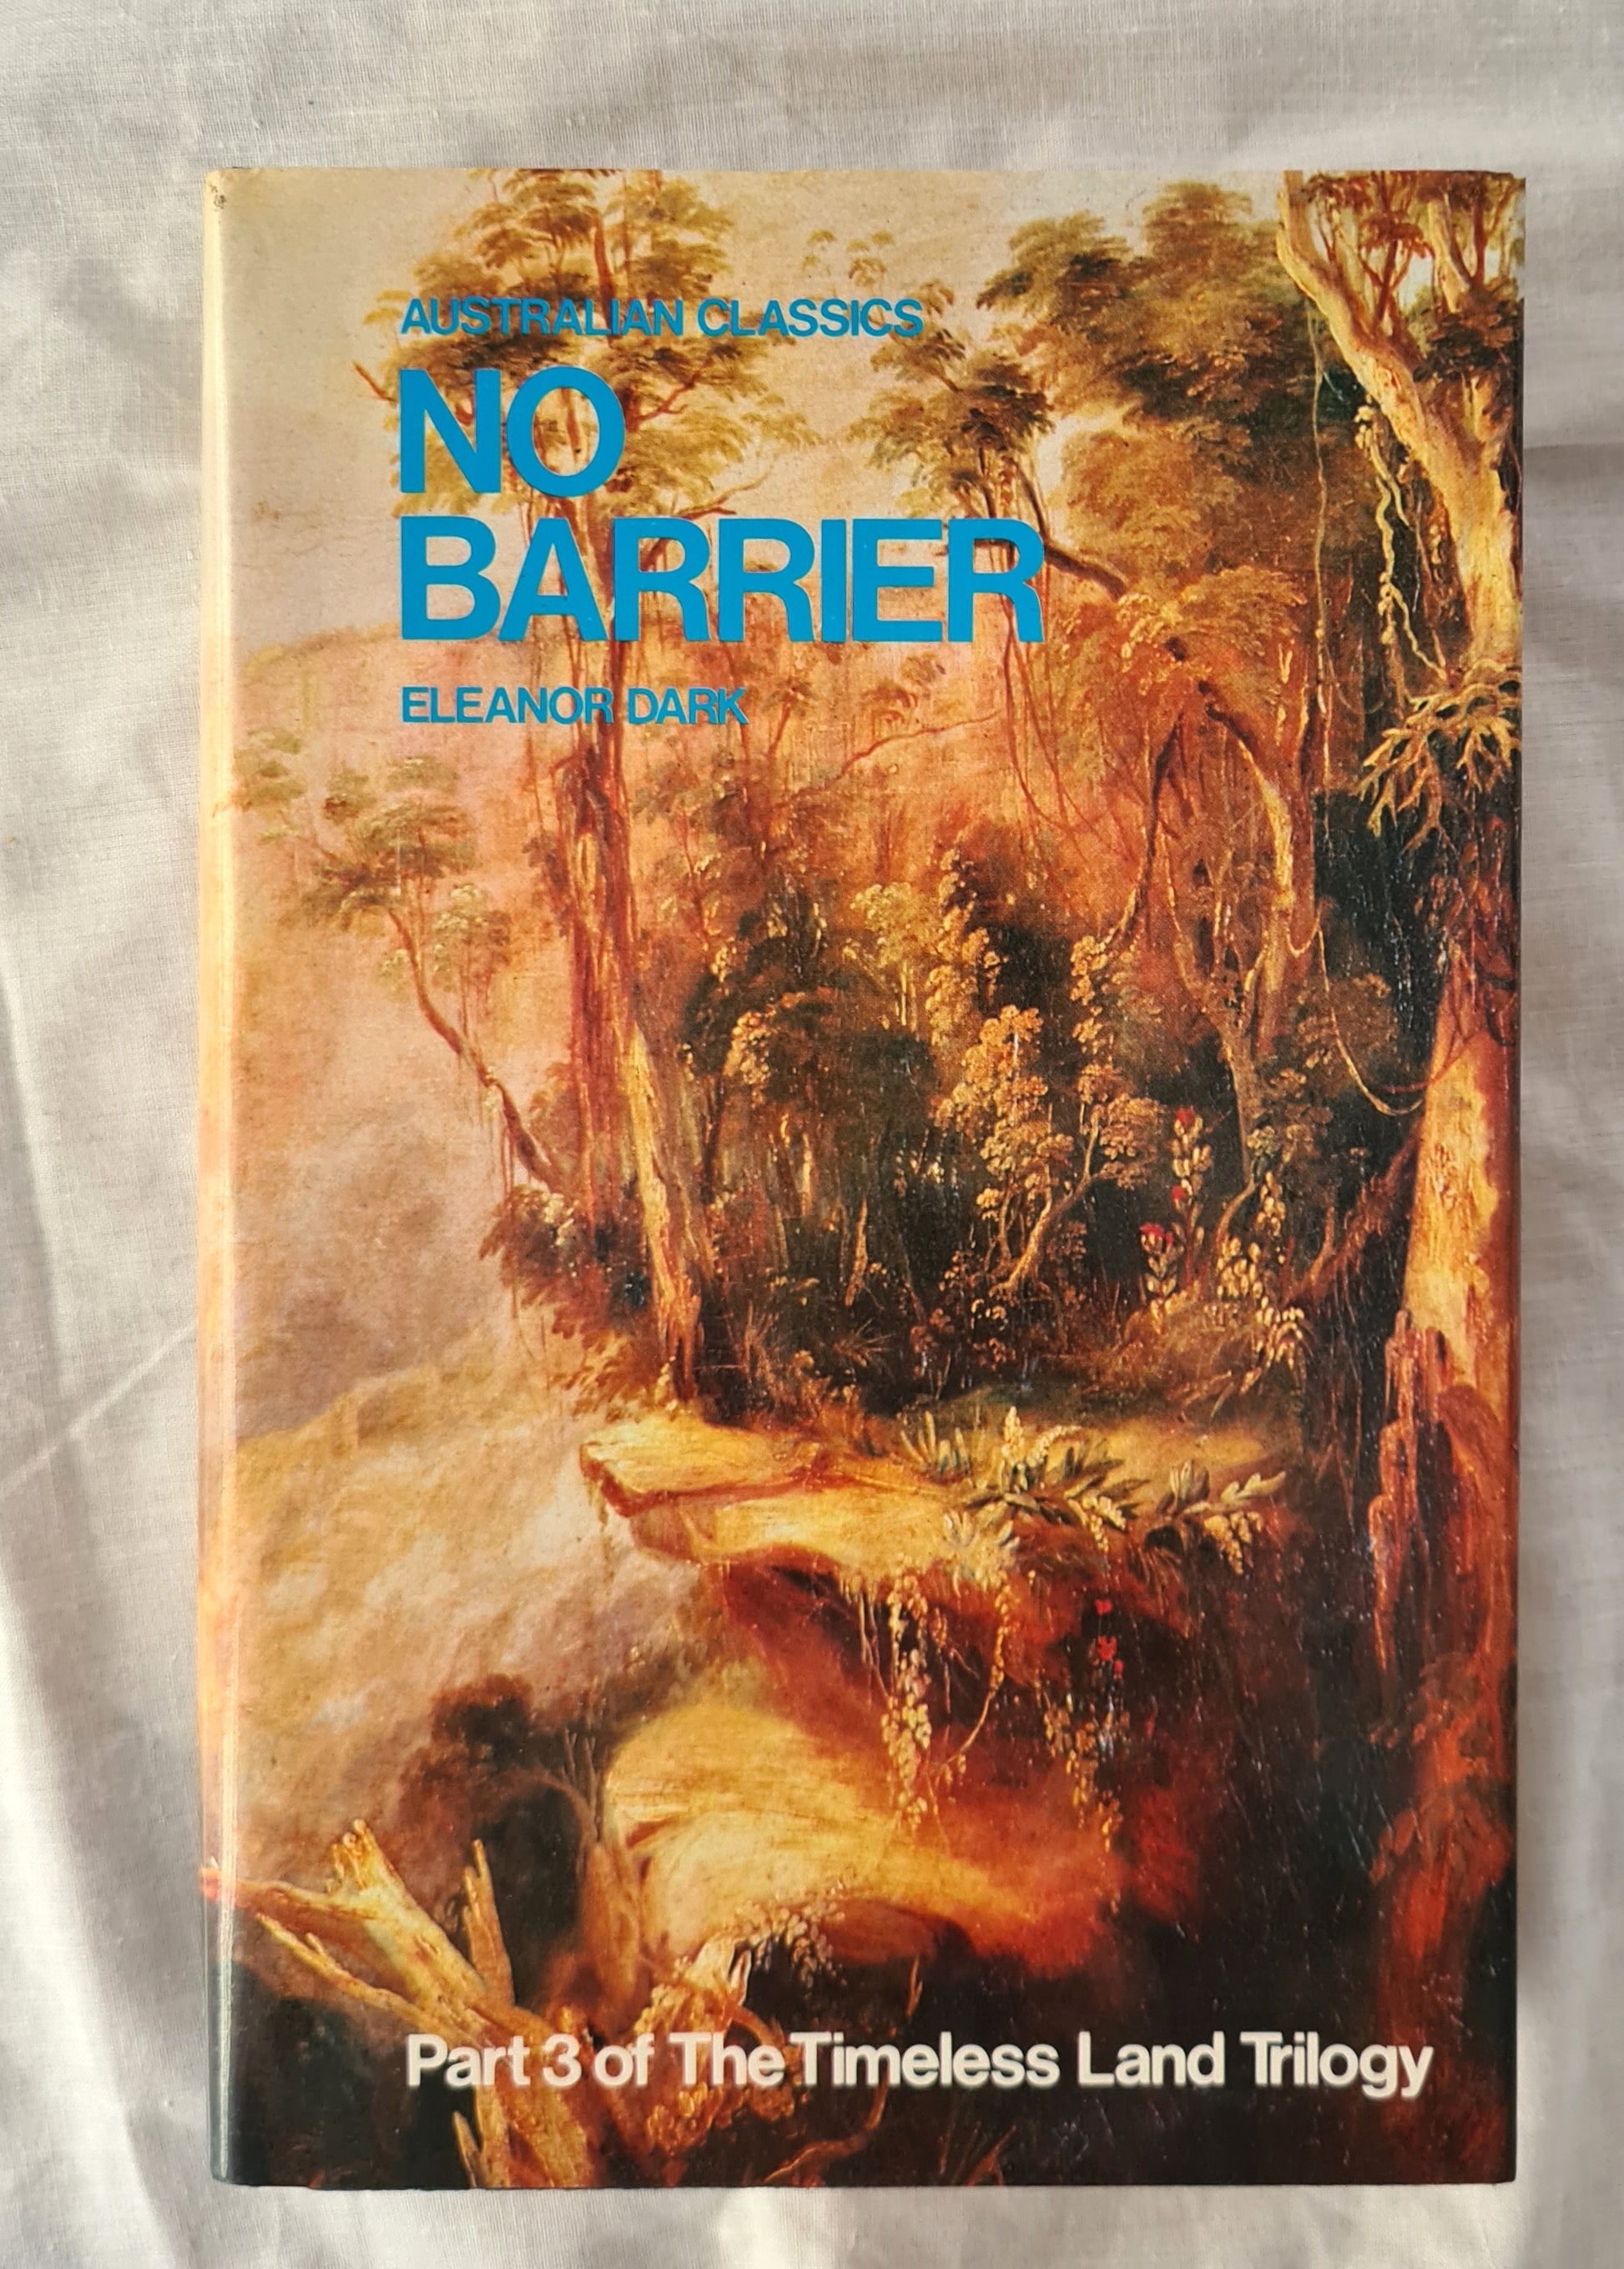 No Barrier  by Eleanor Dark  Part 3 of The Timeless Land Trilogy  (Australian Classics)